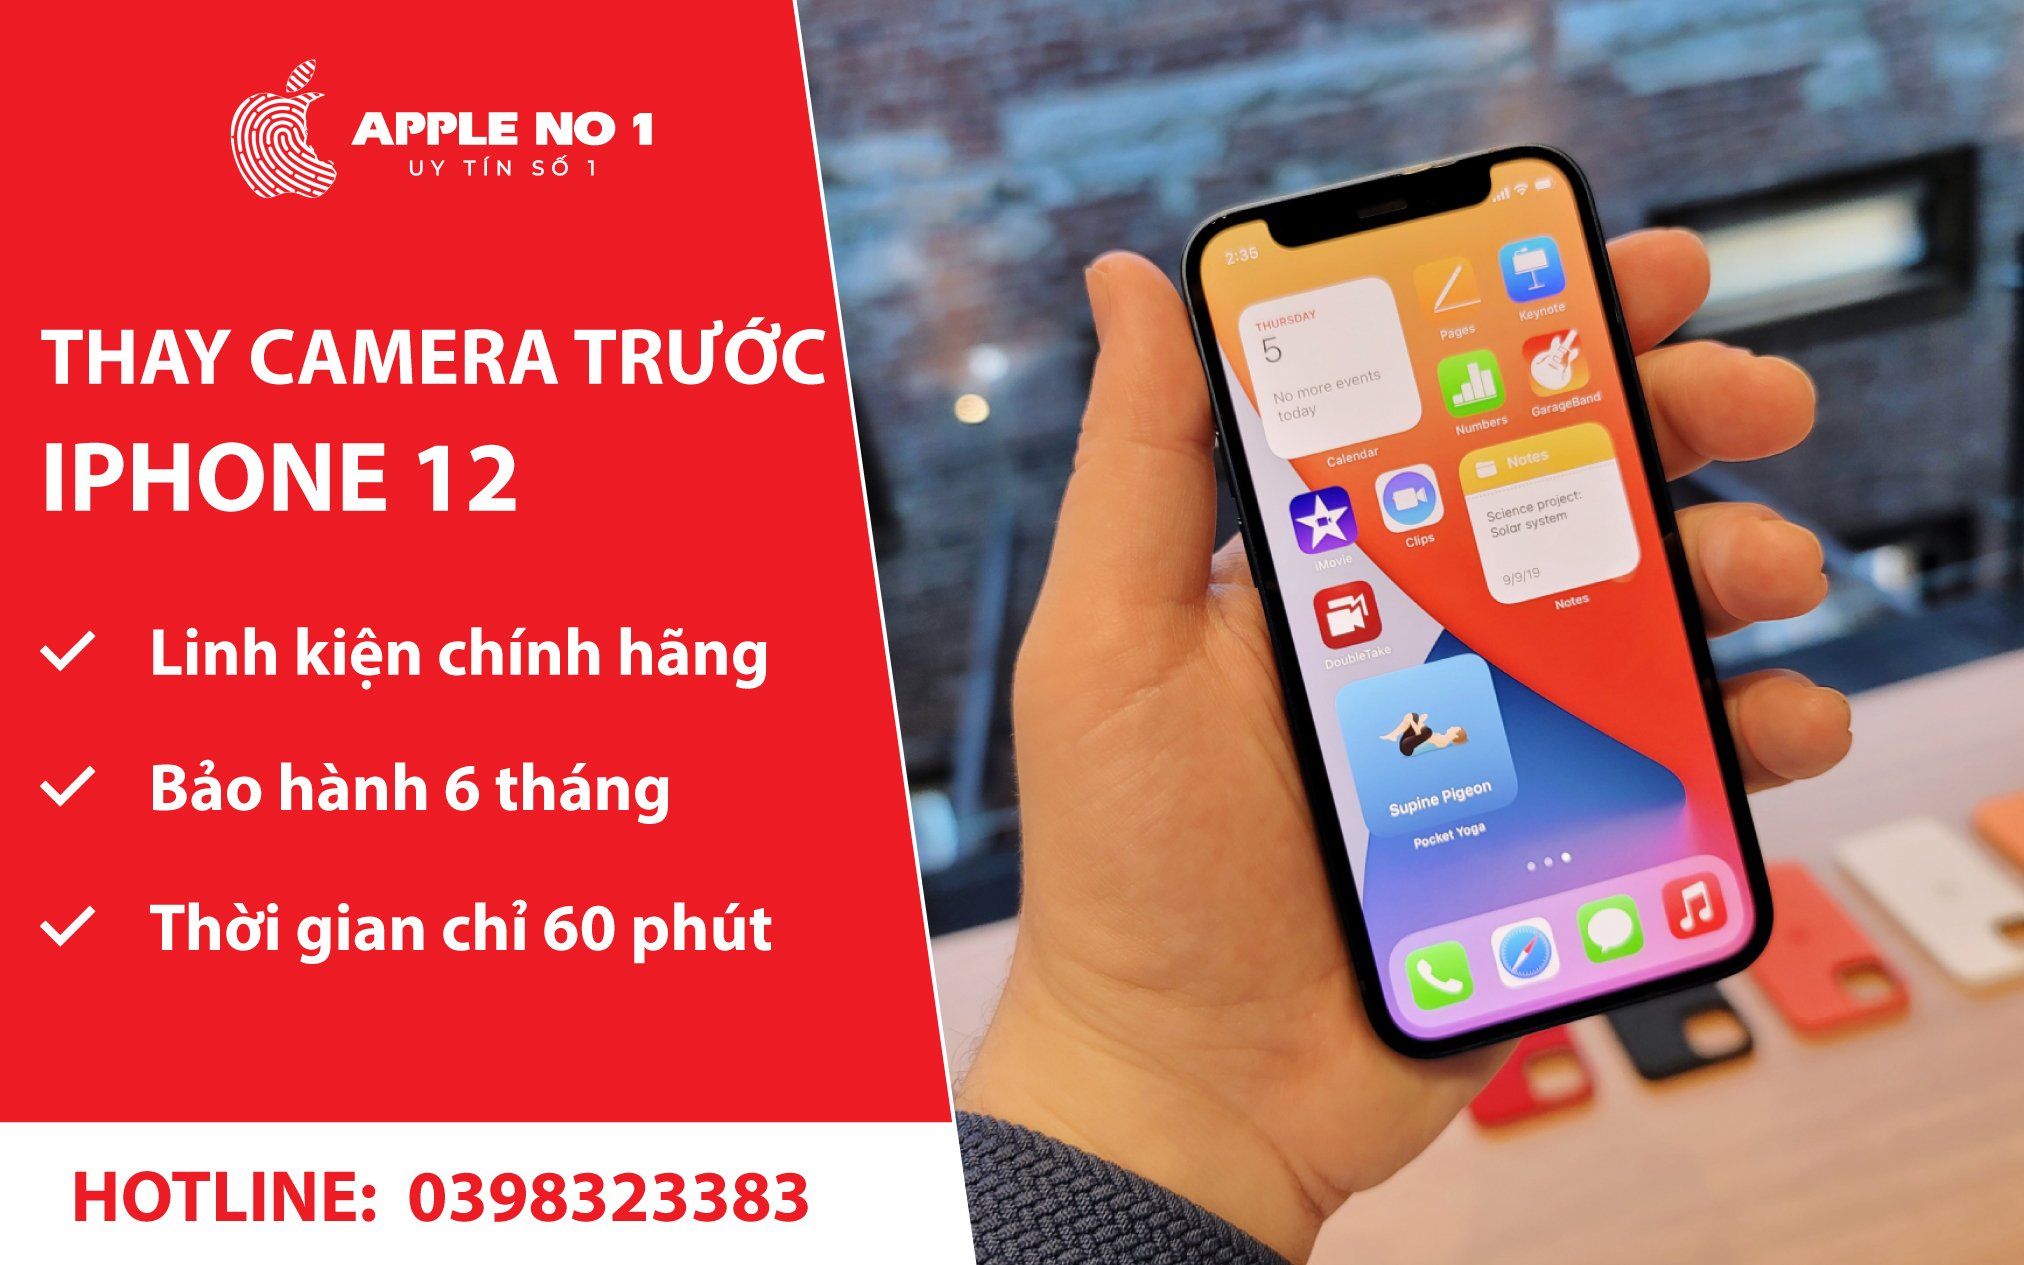 dich vu thay camera truoc iphone 12 uy tin, chat luong tại apple no.1